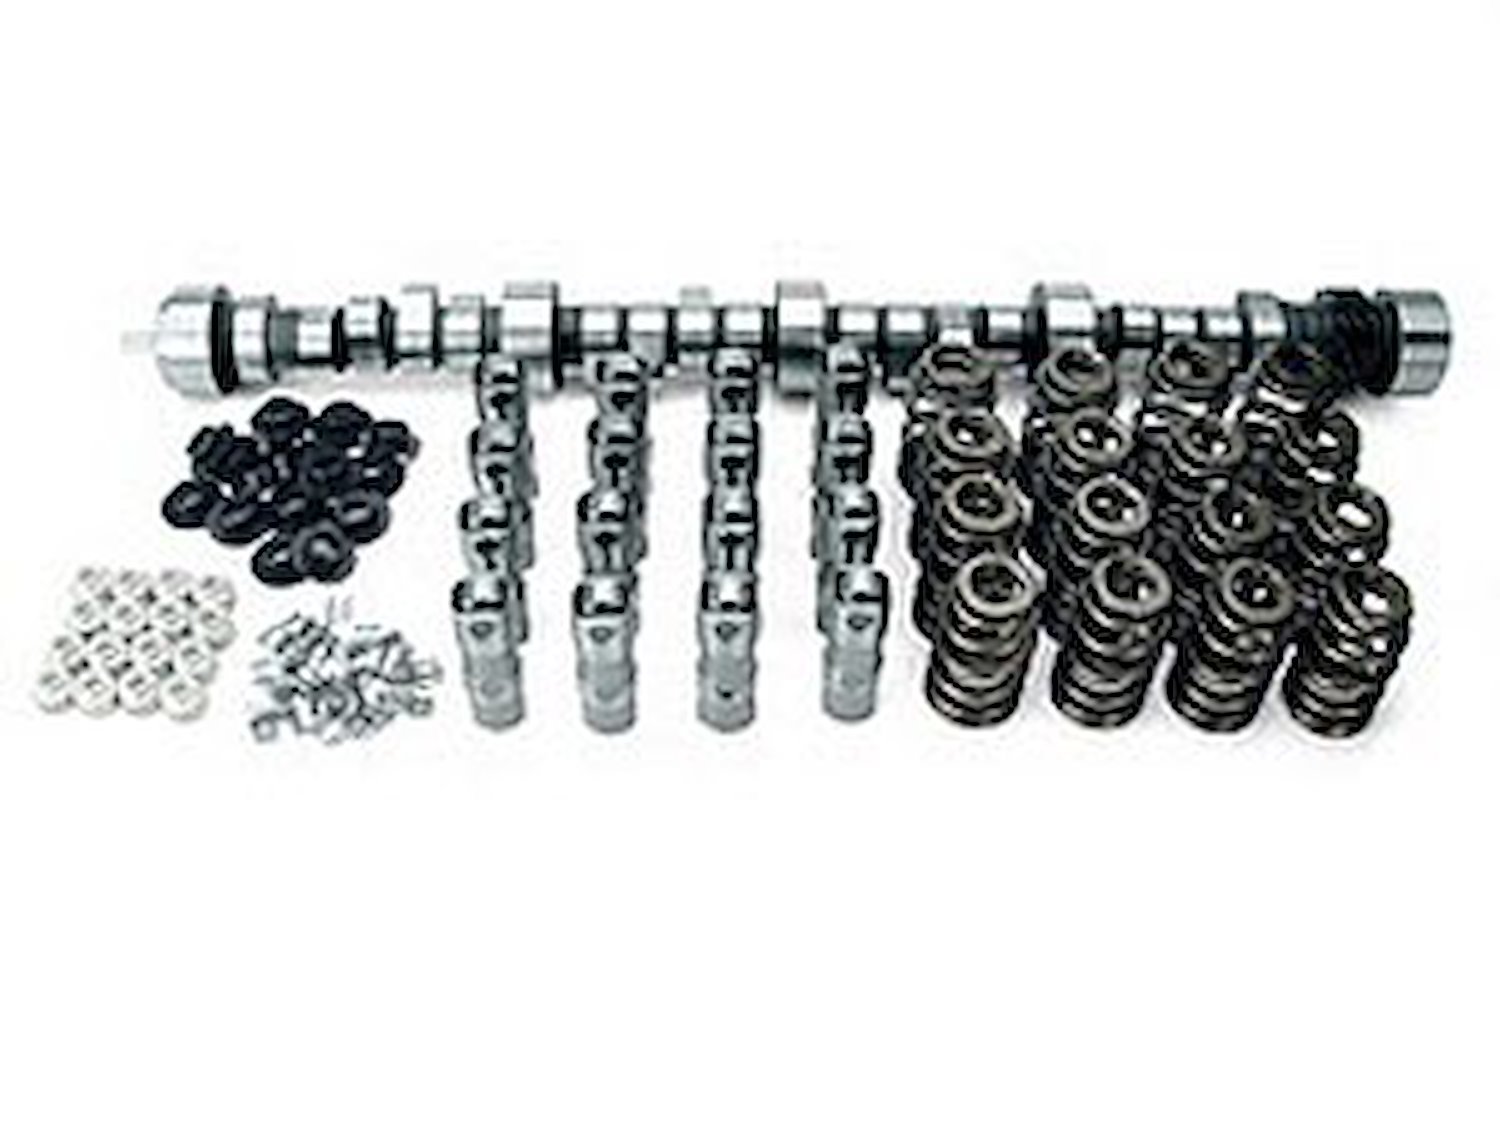 Computer Controlled Hydraulic Roller Tappet Camshaft Complete Kit RPM Range: 1200-5200